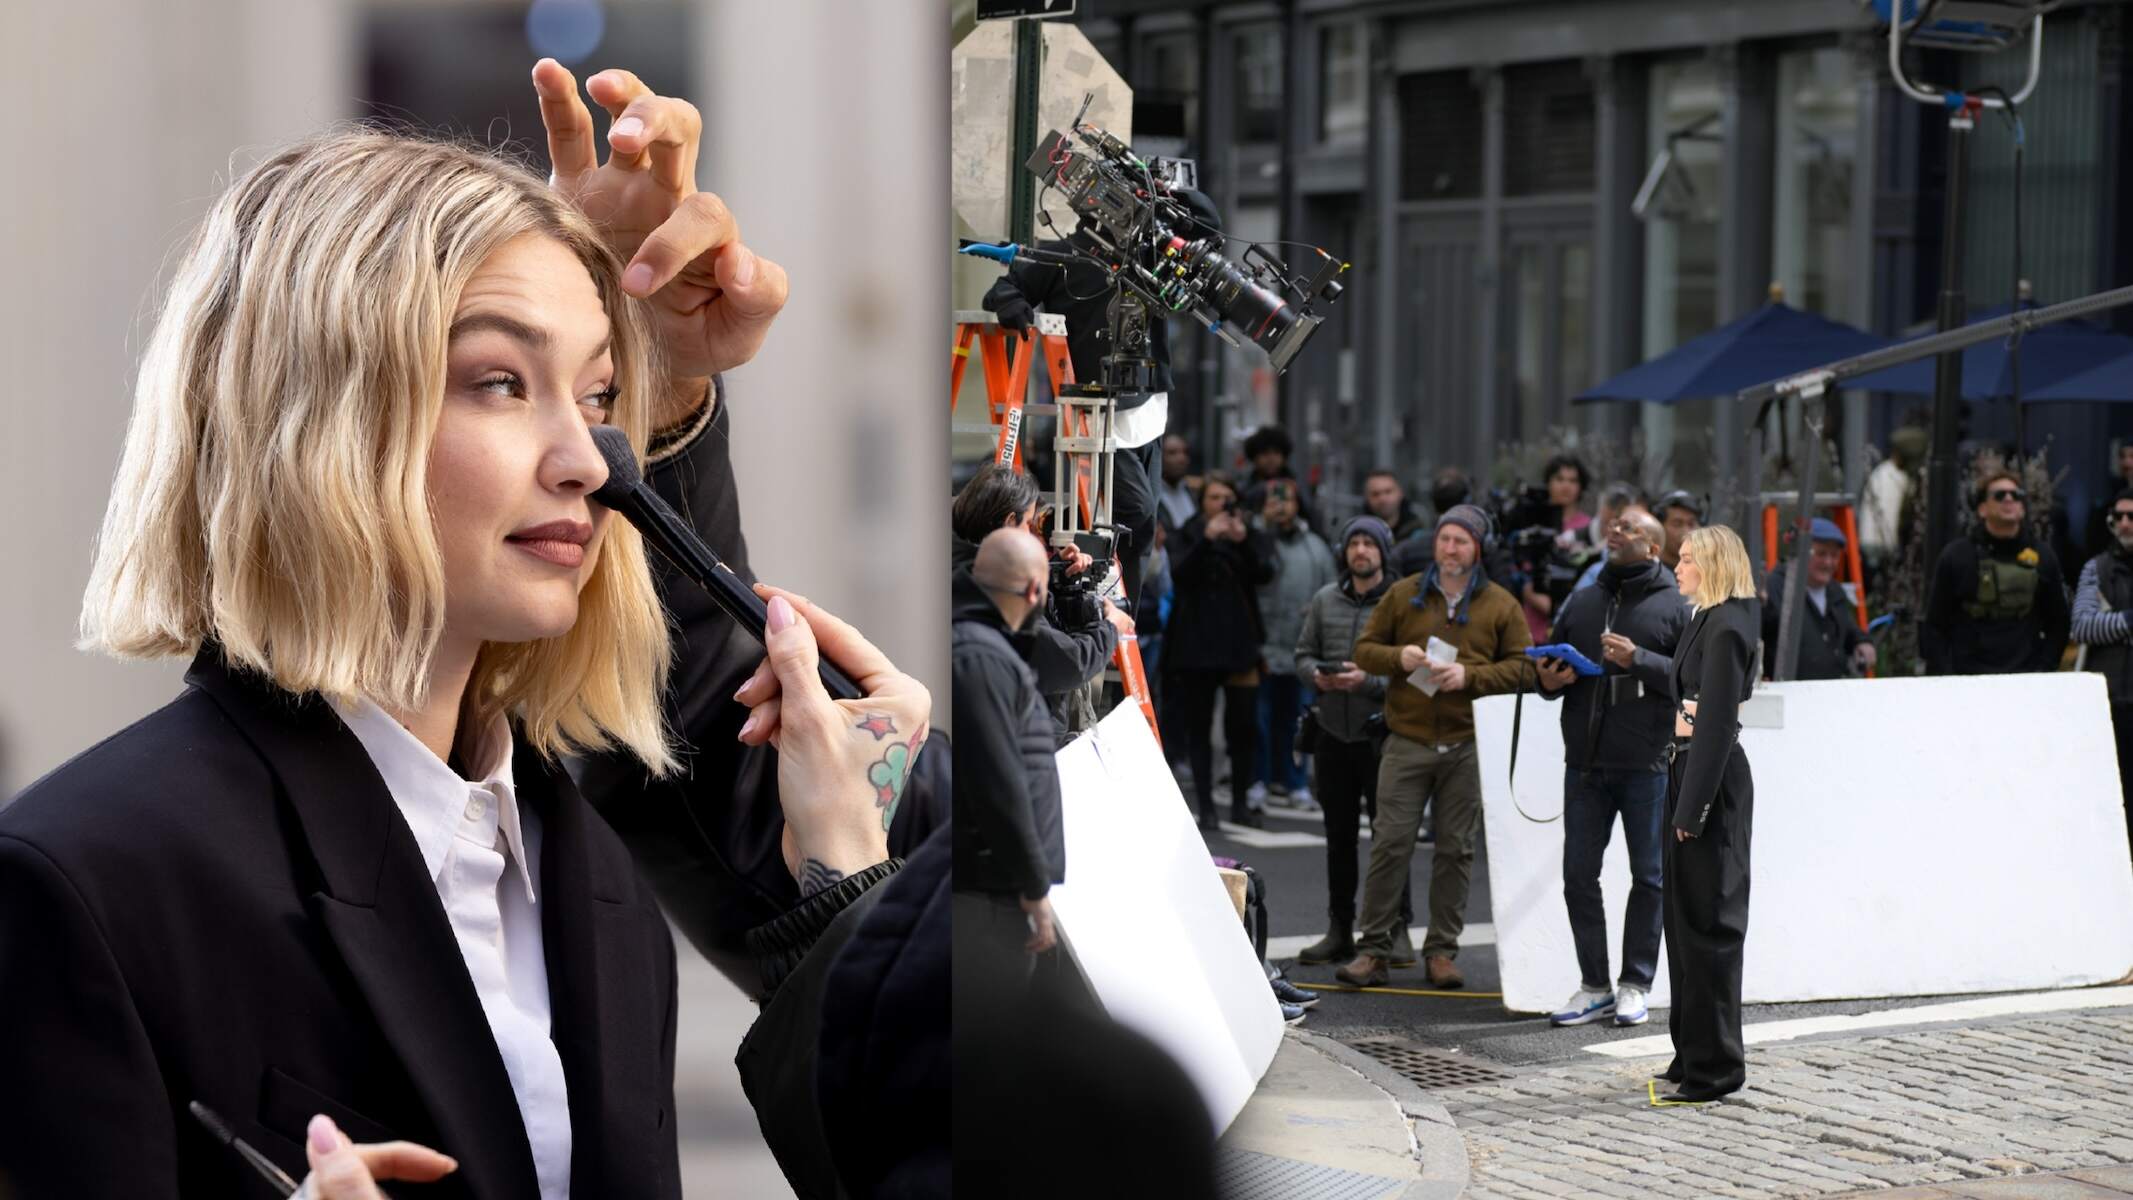 Model Gigi Hadid wears a black jacket and pants while filming a video for Maybelline on a NYC street